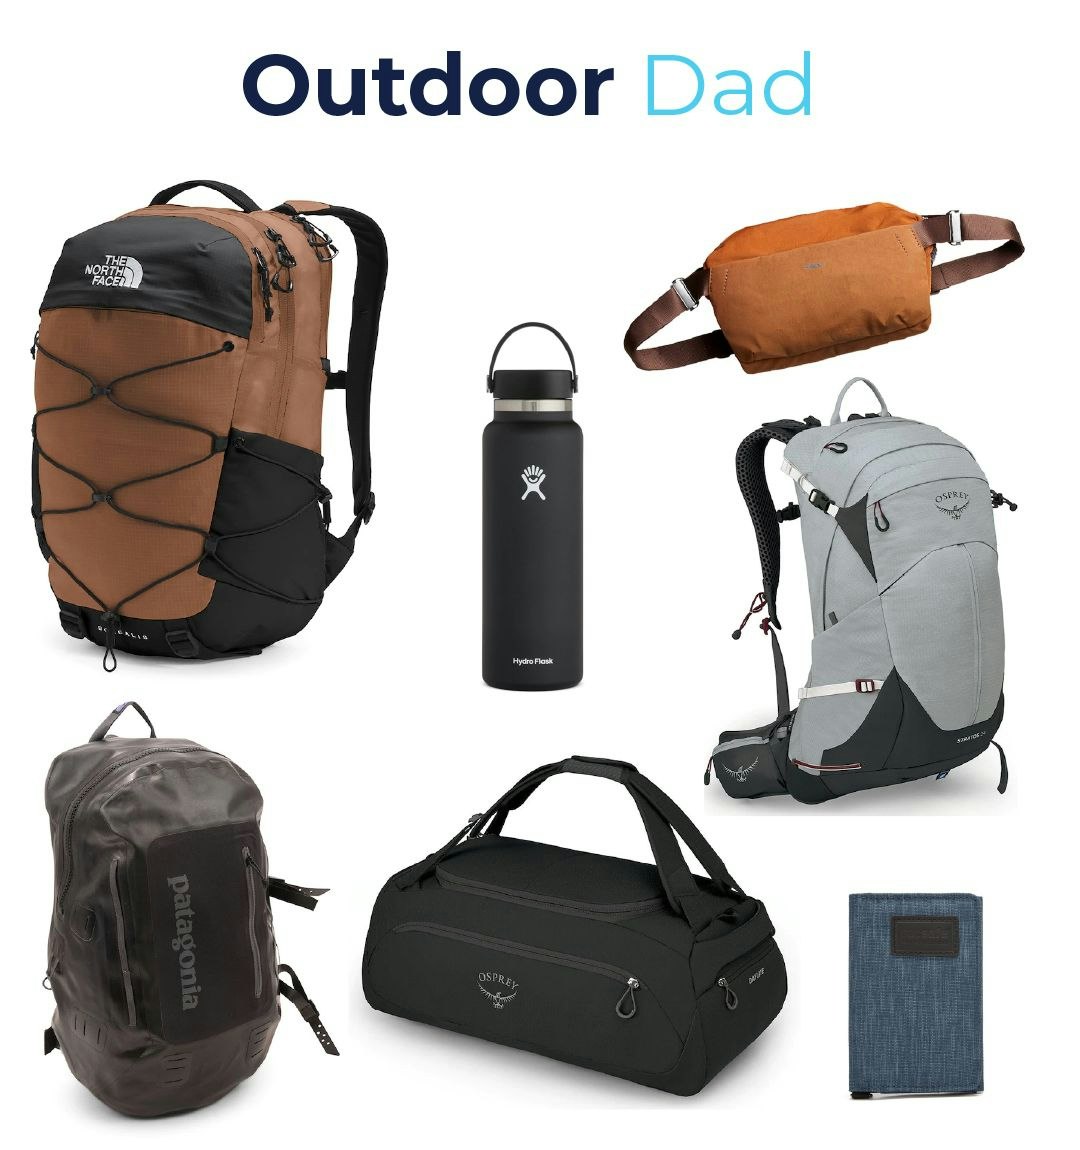 products of gift ideas for Outdoor Dad